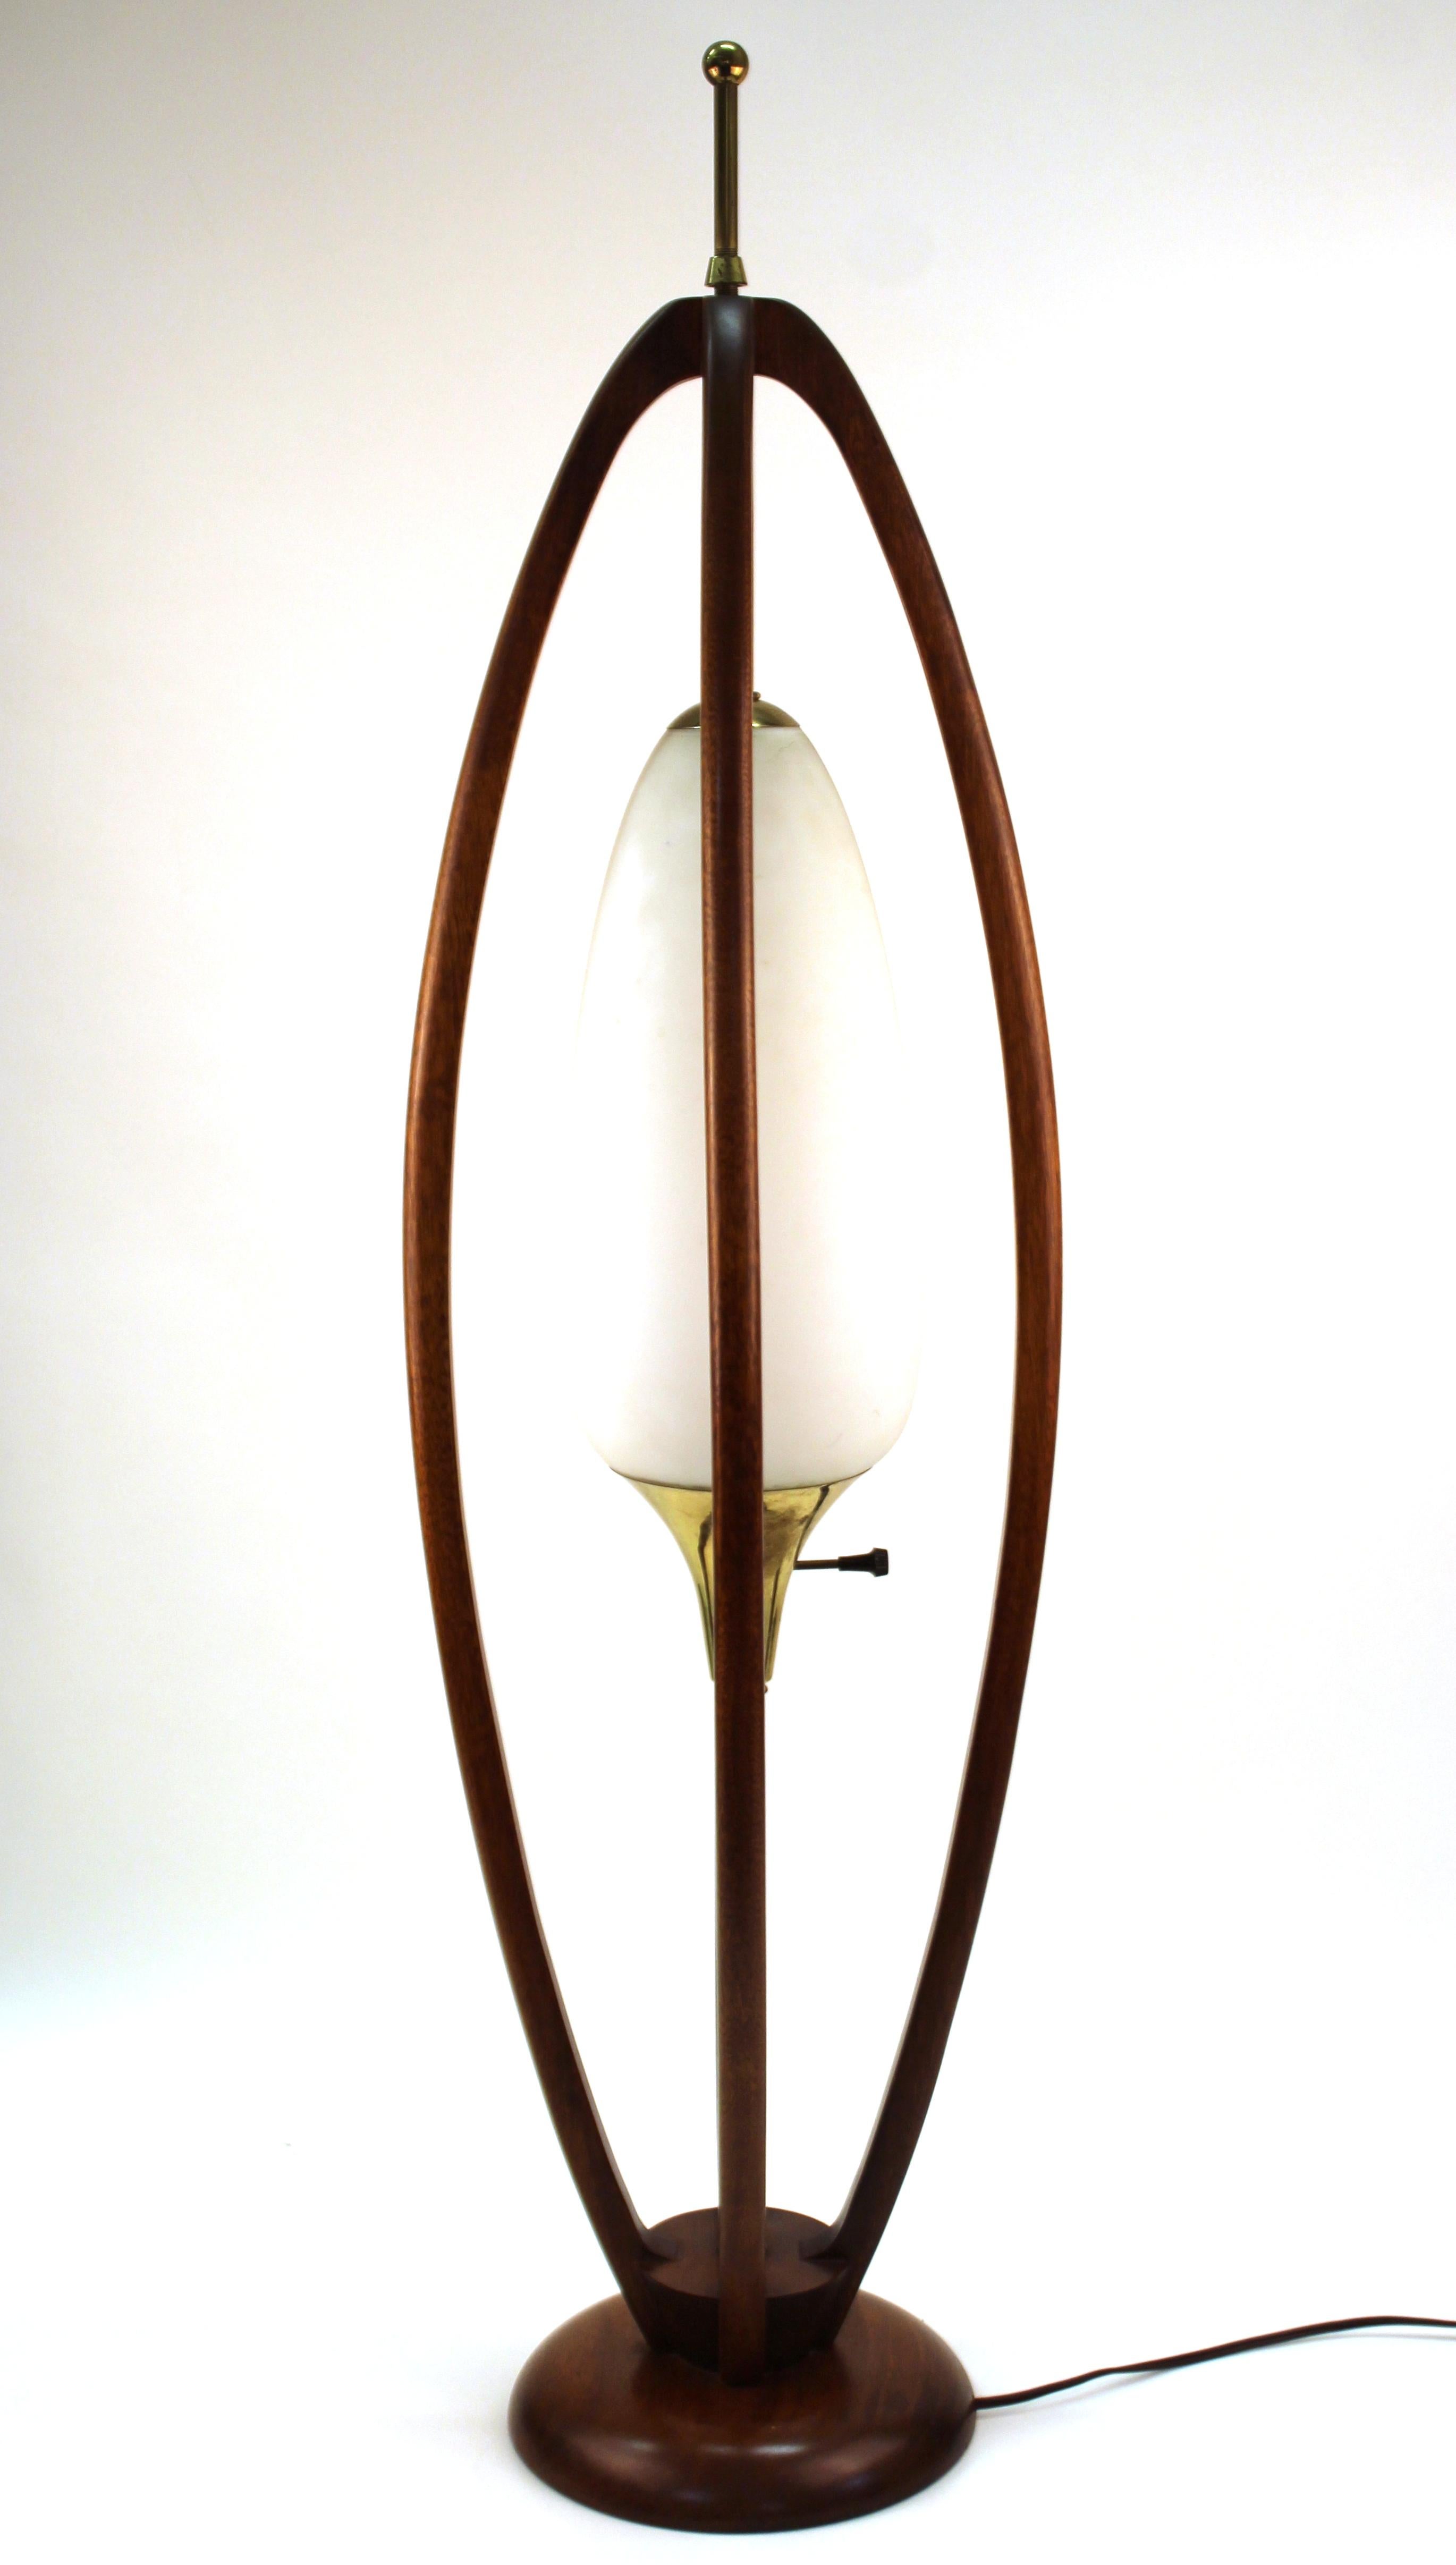 Mid-Century Modern table lamp made in teak with a glass shade, designed in the style of Modeline during the mid-20th century. The piece is in great vintage condition with some age-appropriate wear to the base and glass shade.